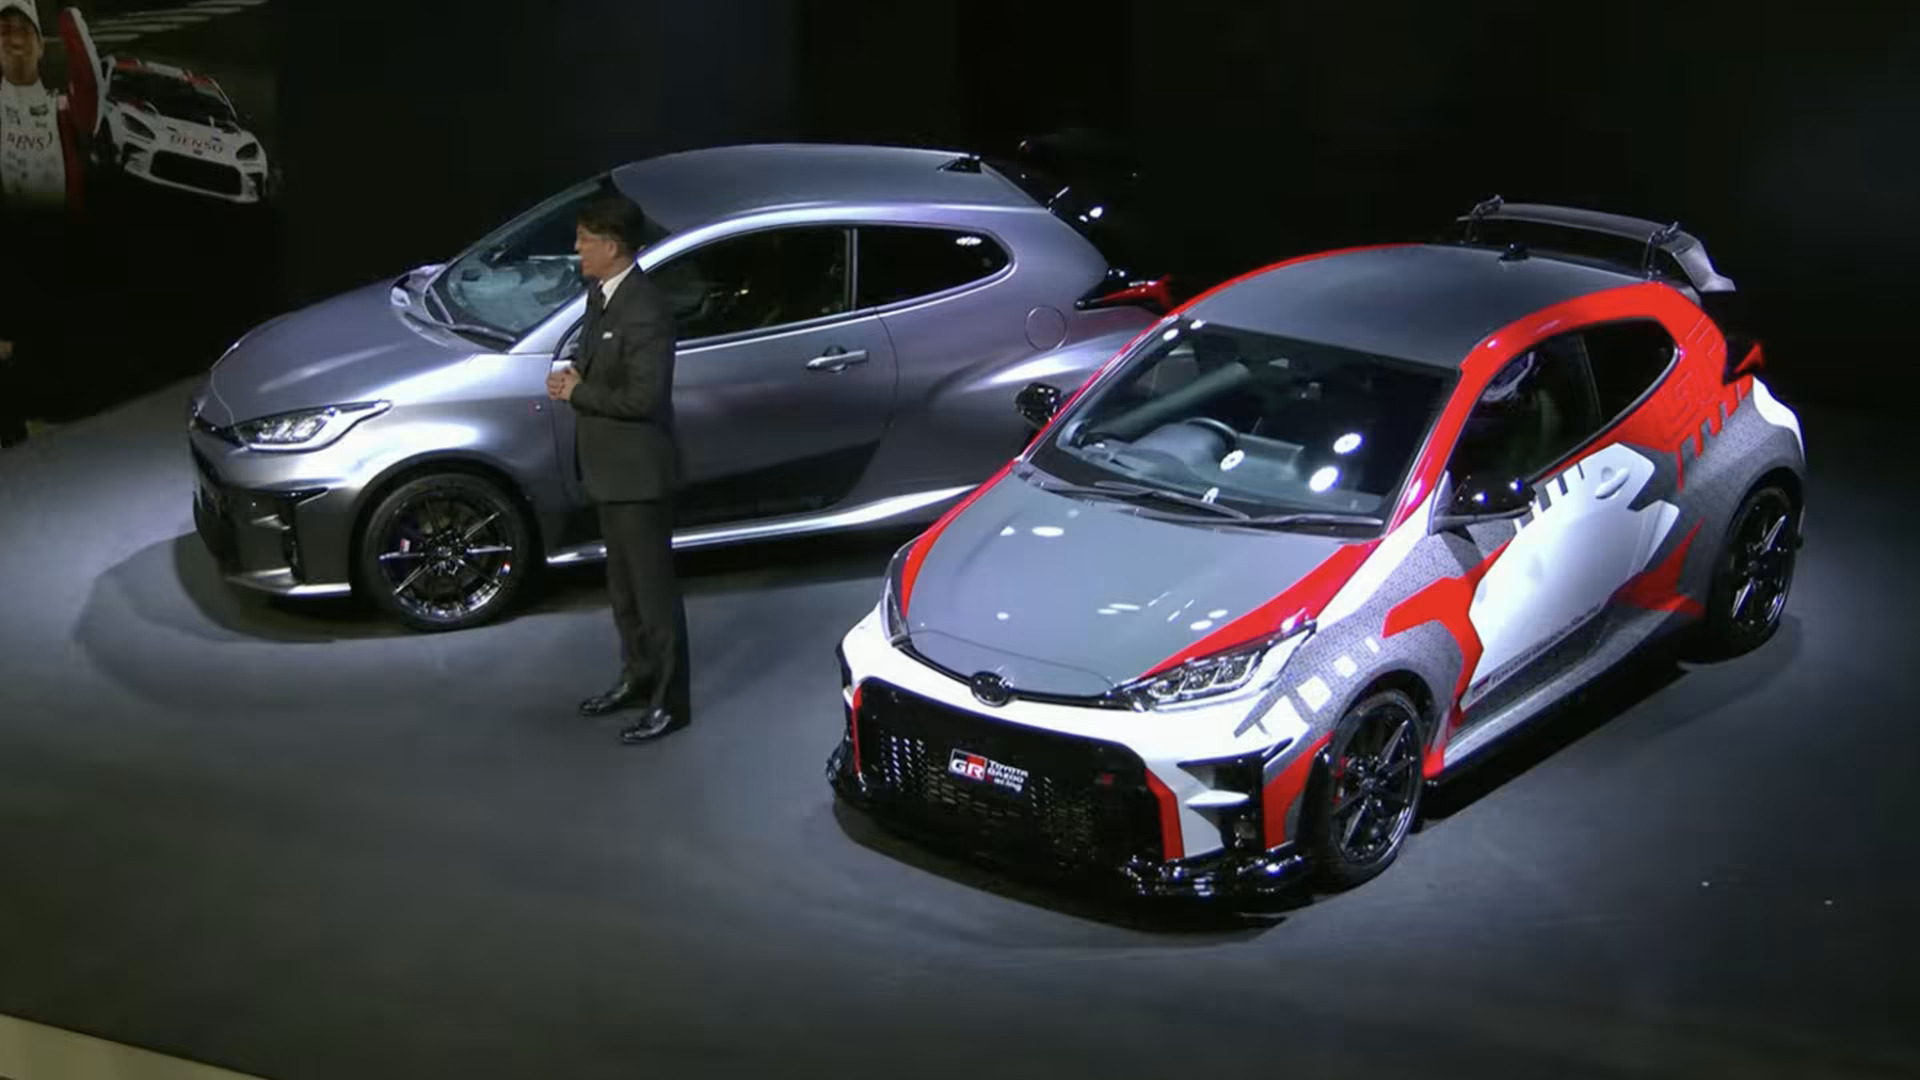 Toyota Introduces Ogier and Rovanpera Editions to the Upgraded GR Yaris